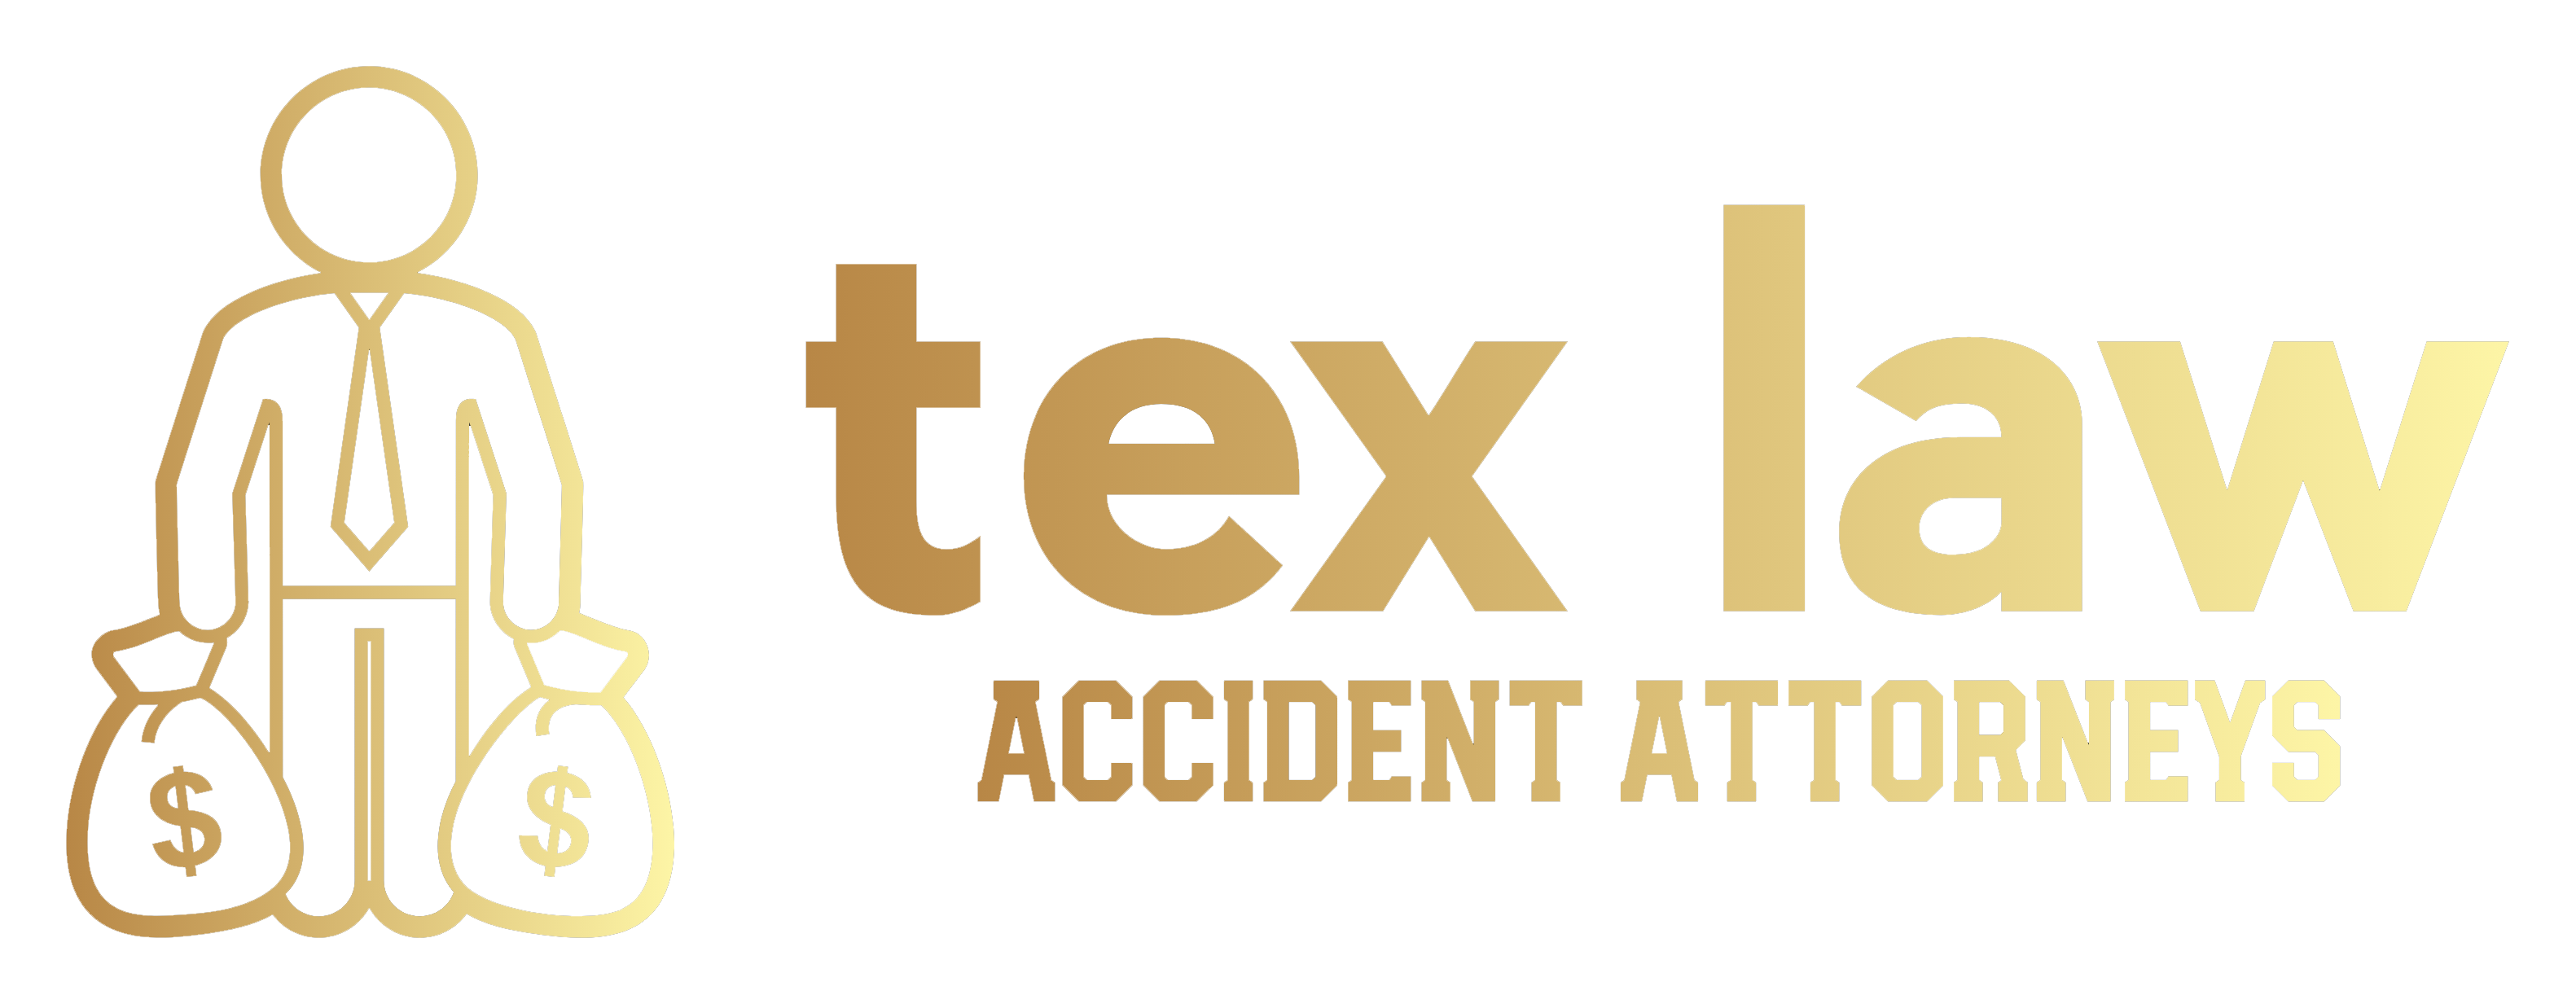 accident-attorney law-attorney